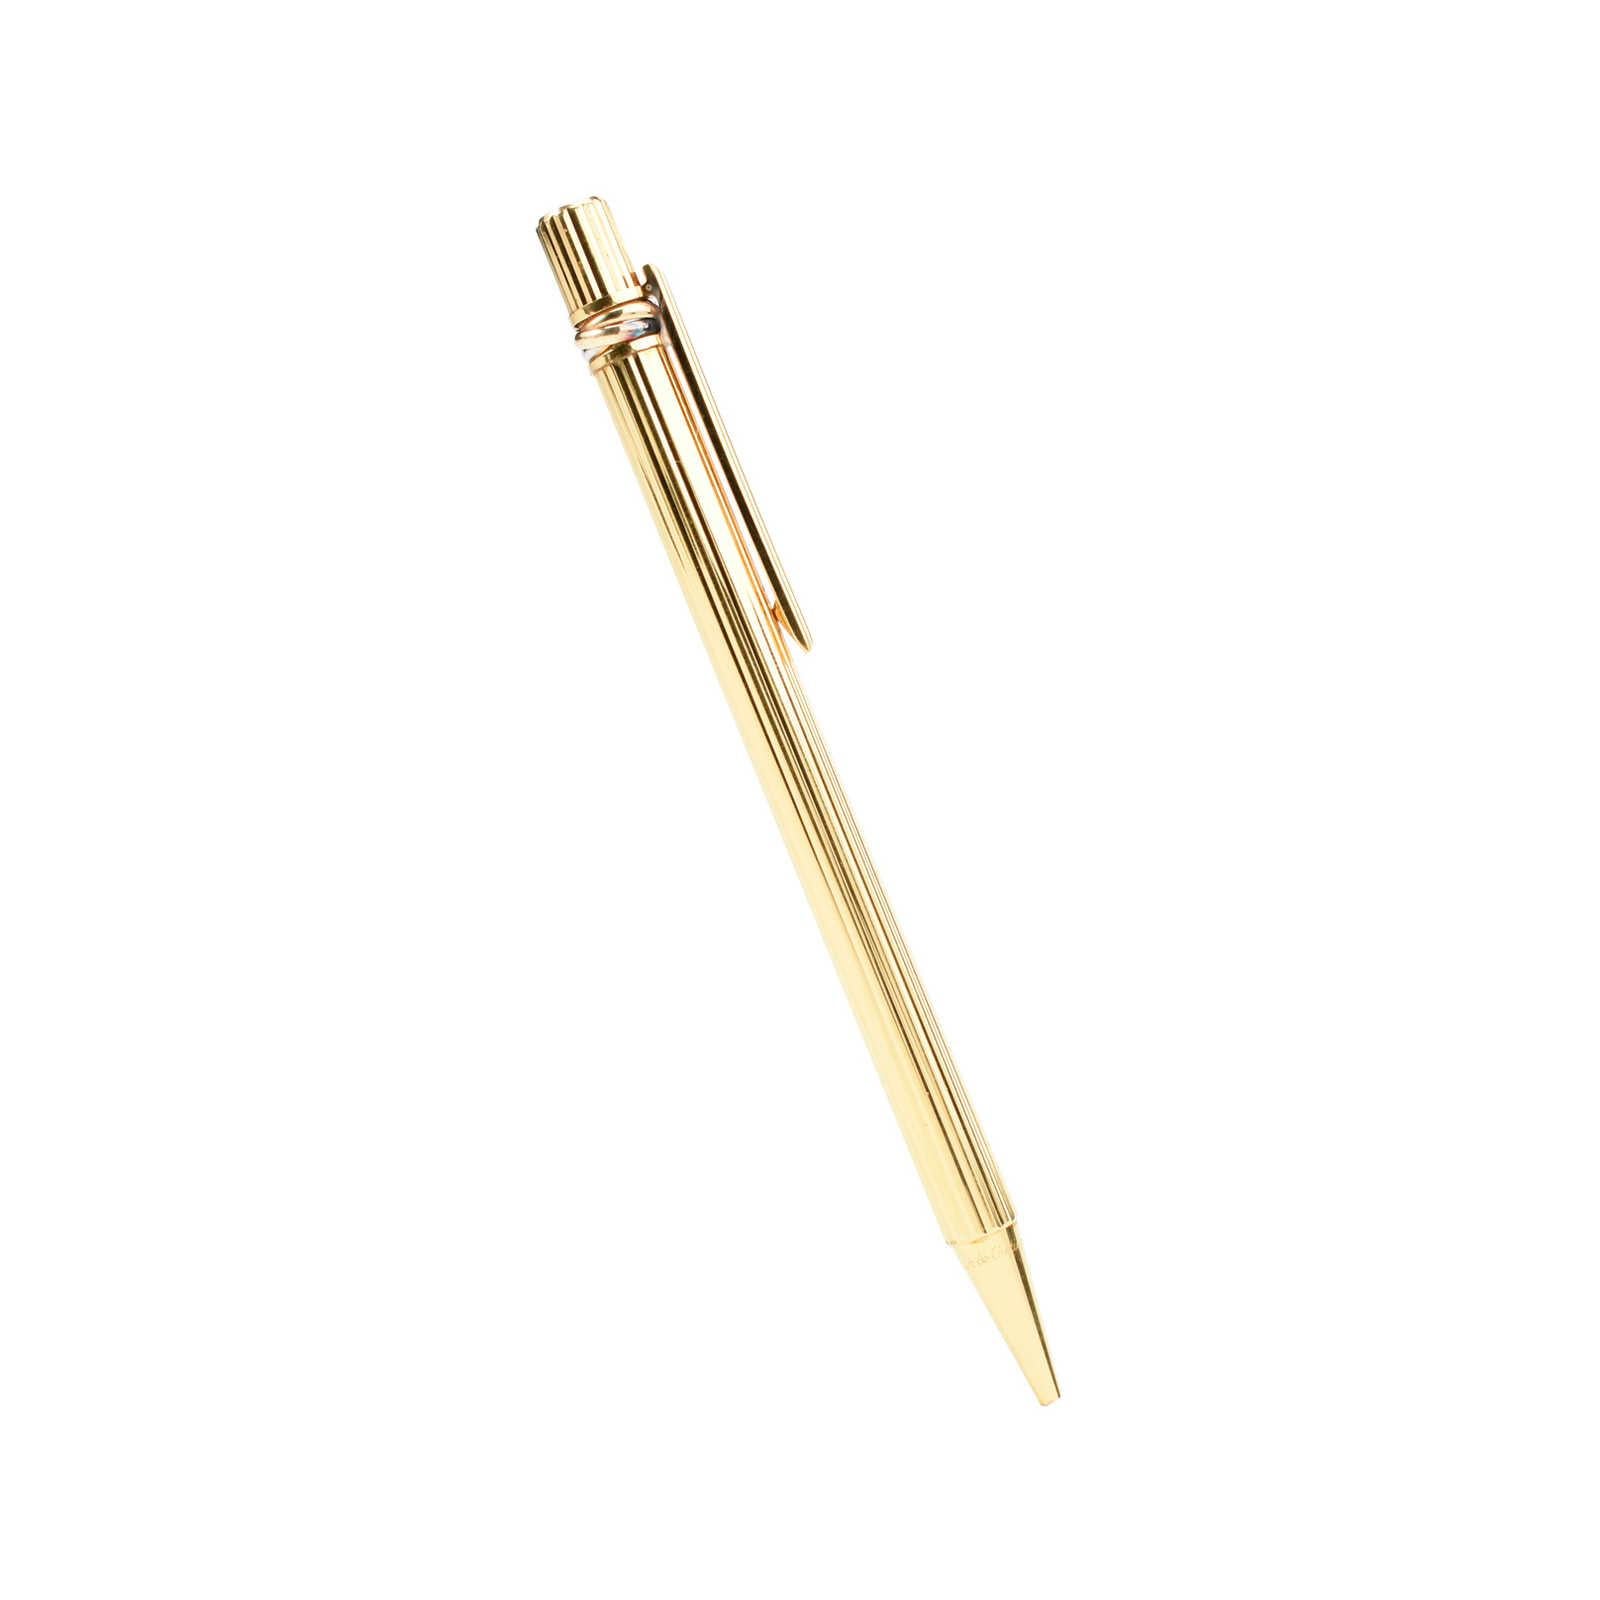 Cartier Made in France
Stamped Cartier Must De, Plaque or G, Made in France , 187994
Serial Number: 05905
In working condition , Writes very smooth .
This is a 18K Gold plated ball point pen. This classic pen measures 12.5cm or 4.9 inches with the